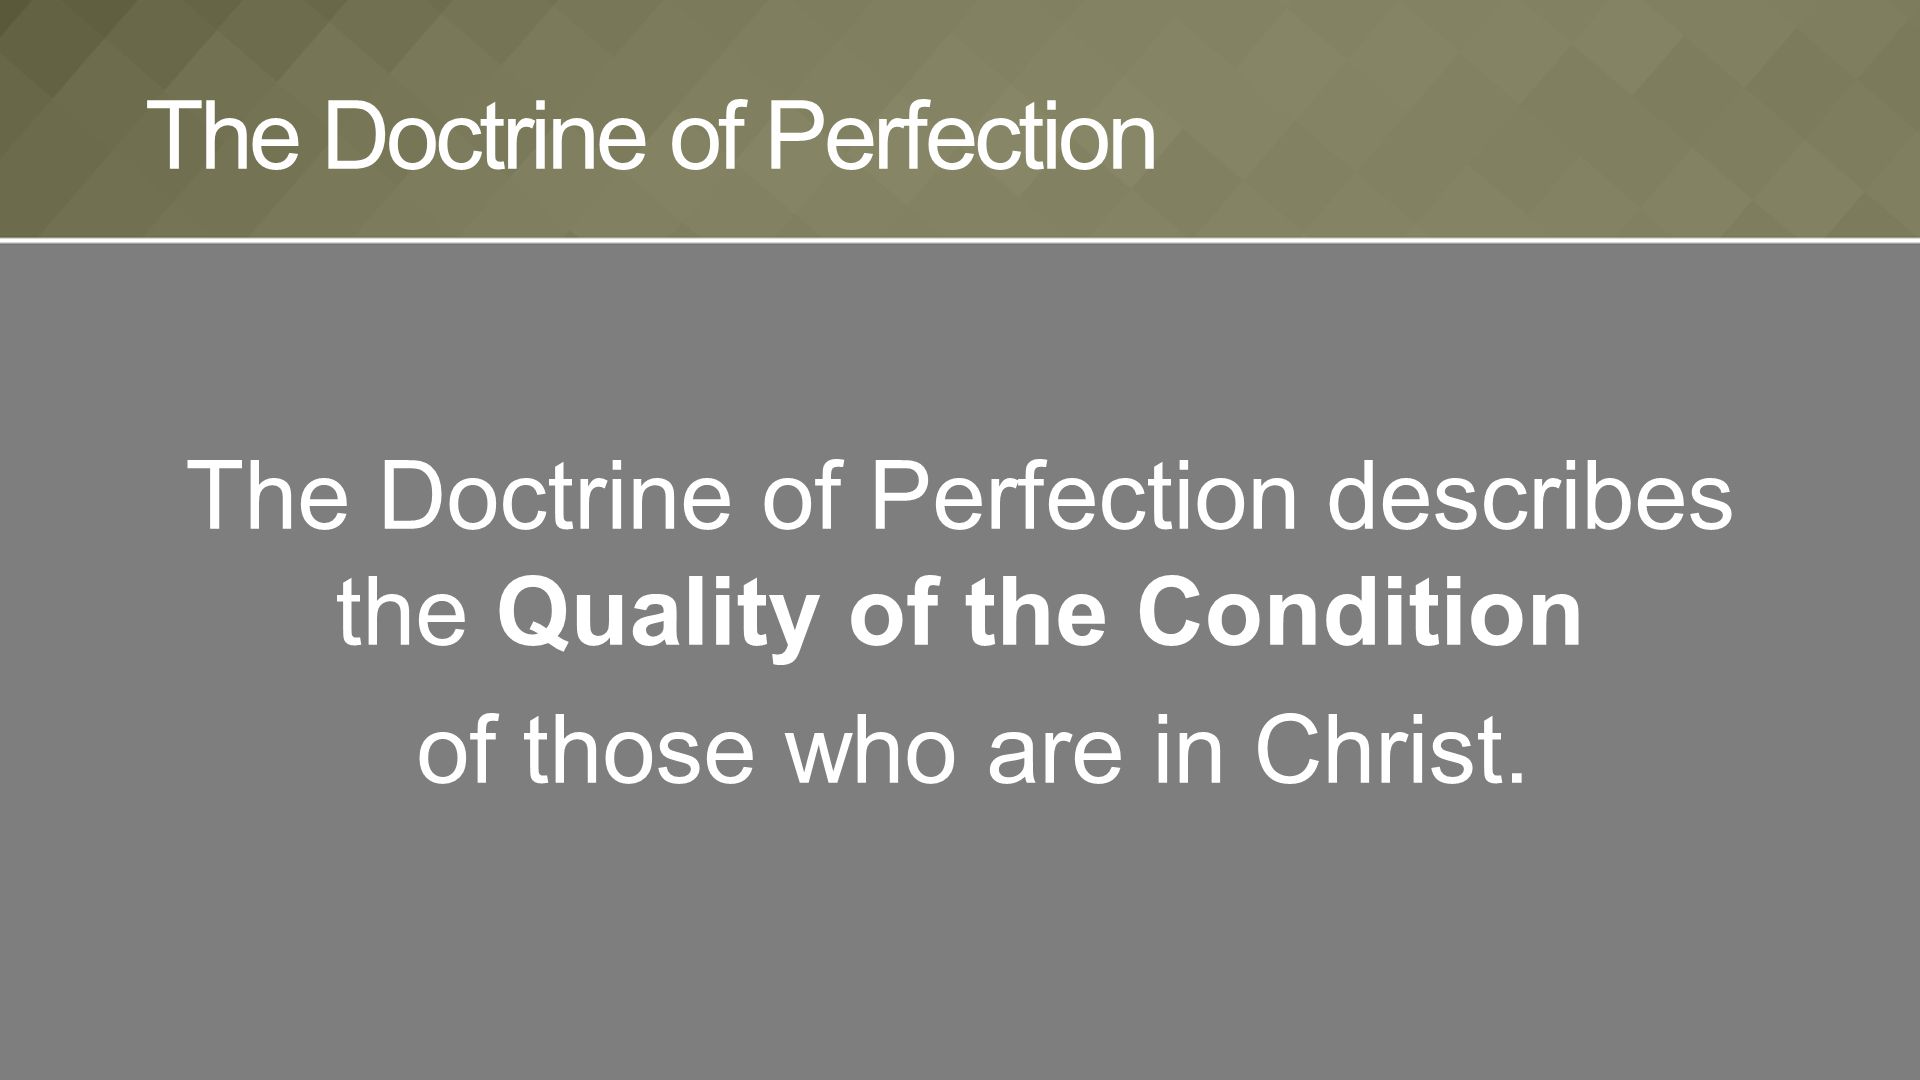 The Doctrine of Perfection describes the Quality of the Condition of those who are in Christ.